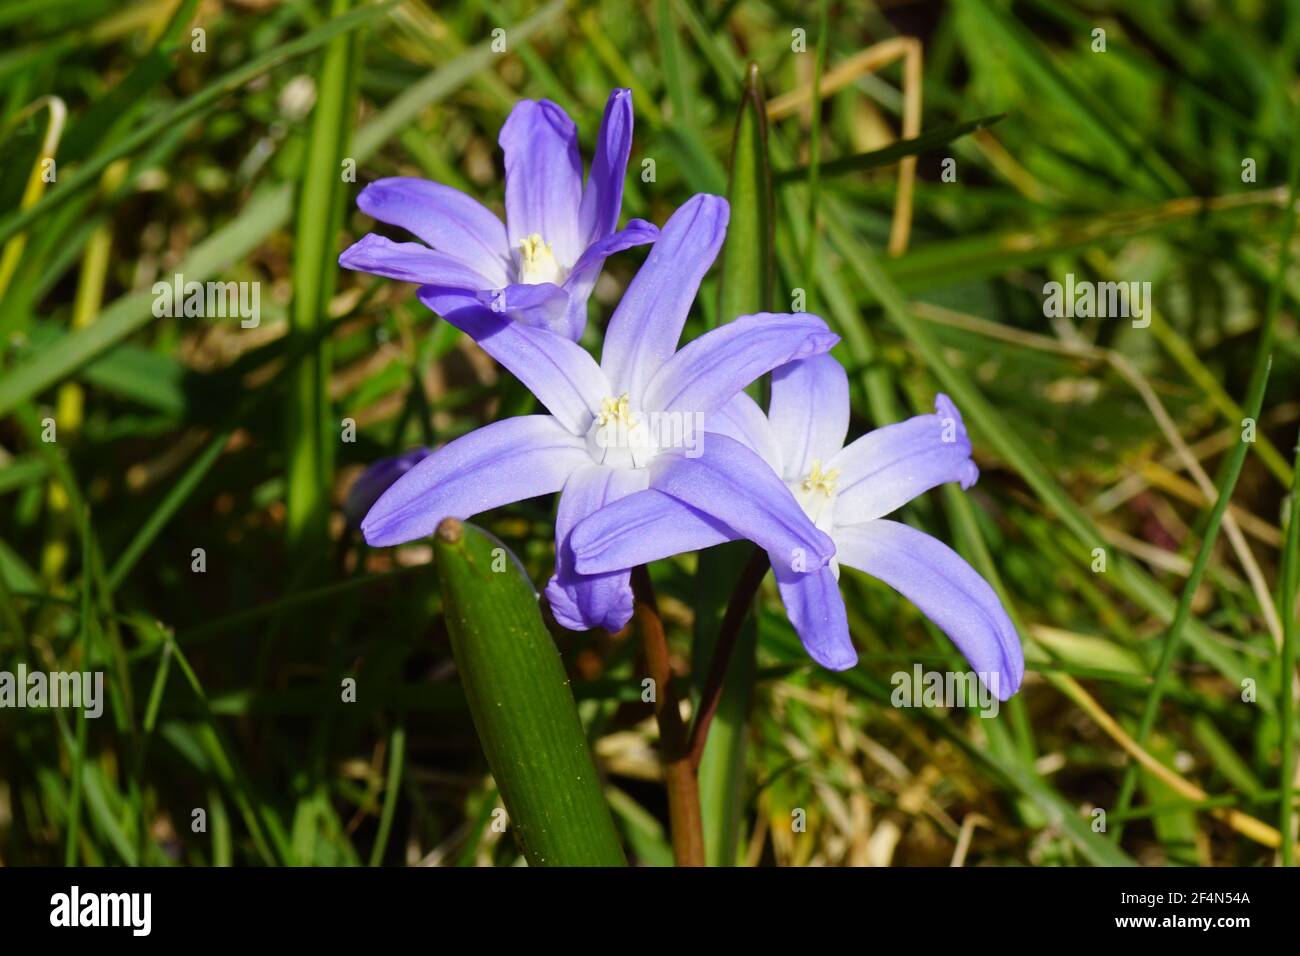 Flowering Glory of the Snow (Chionodoxa luciliae), subfamily Scilloideae, family Asparagaceae. Faded green garden in the background. Spring, March, Stock Photo